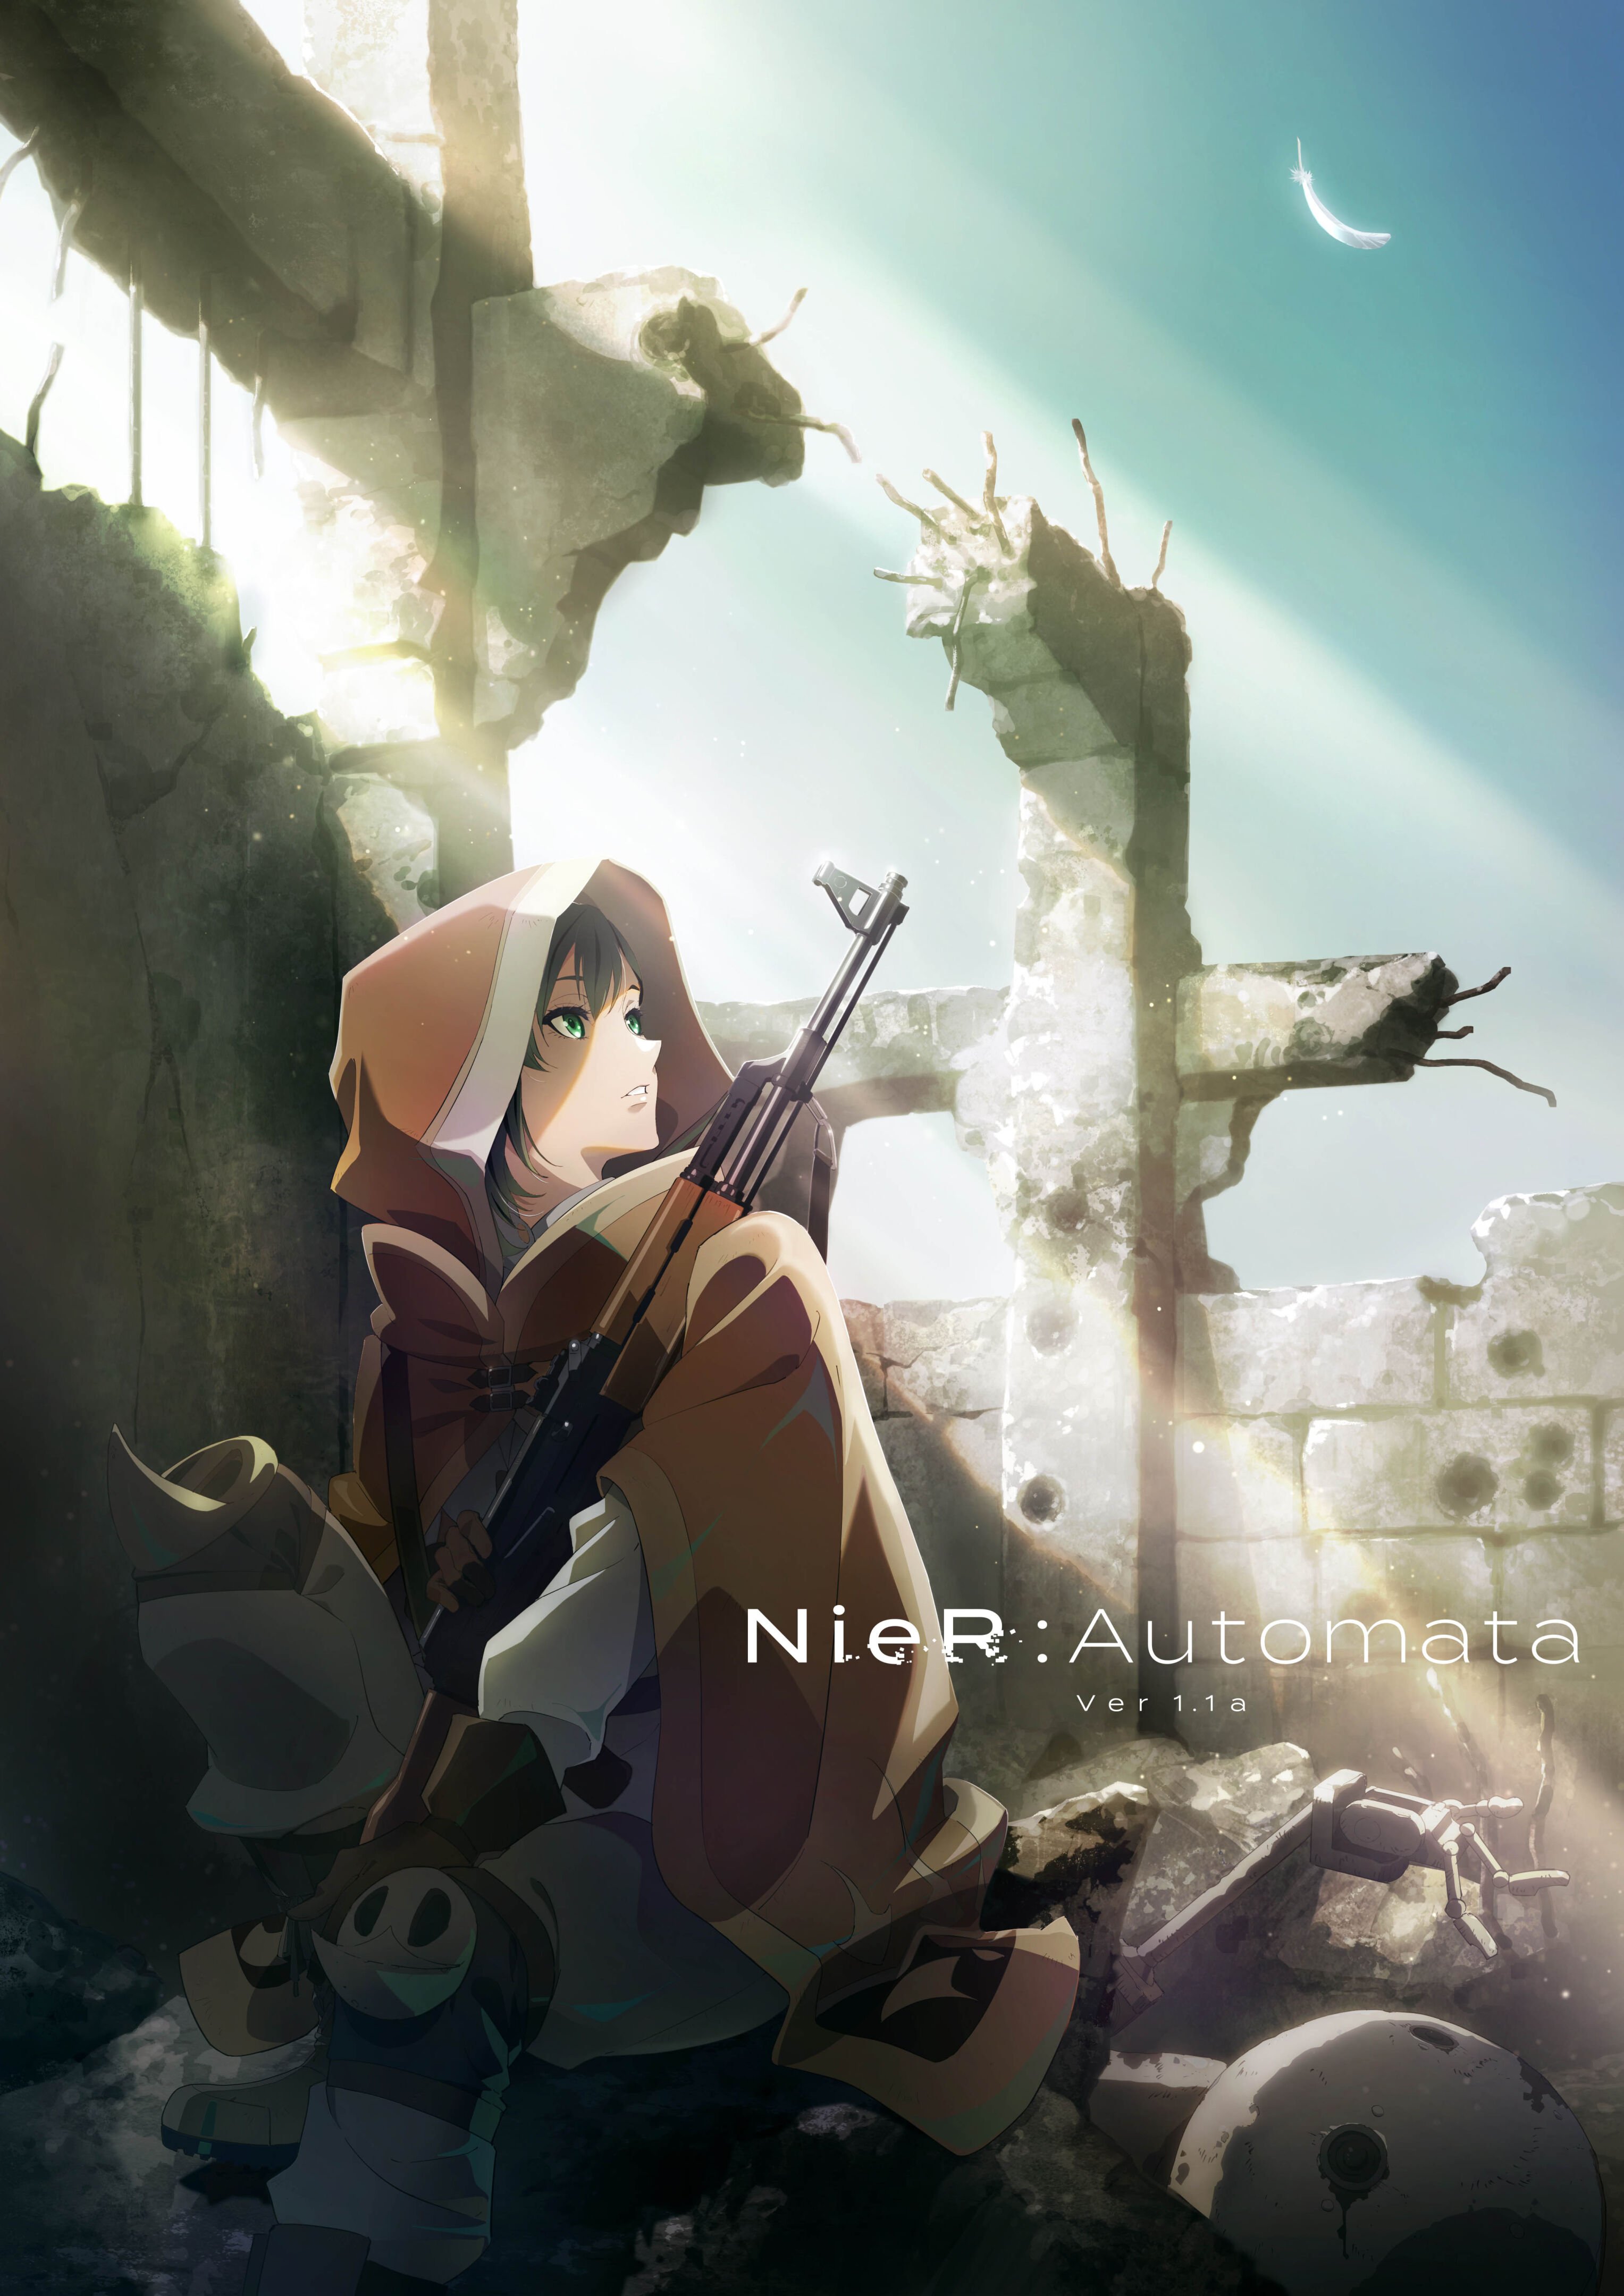 NieR:Automata Ver1.1a Delays New Episodes Once Again - Anime Corner